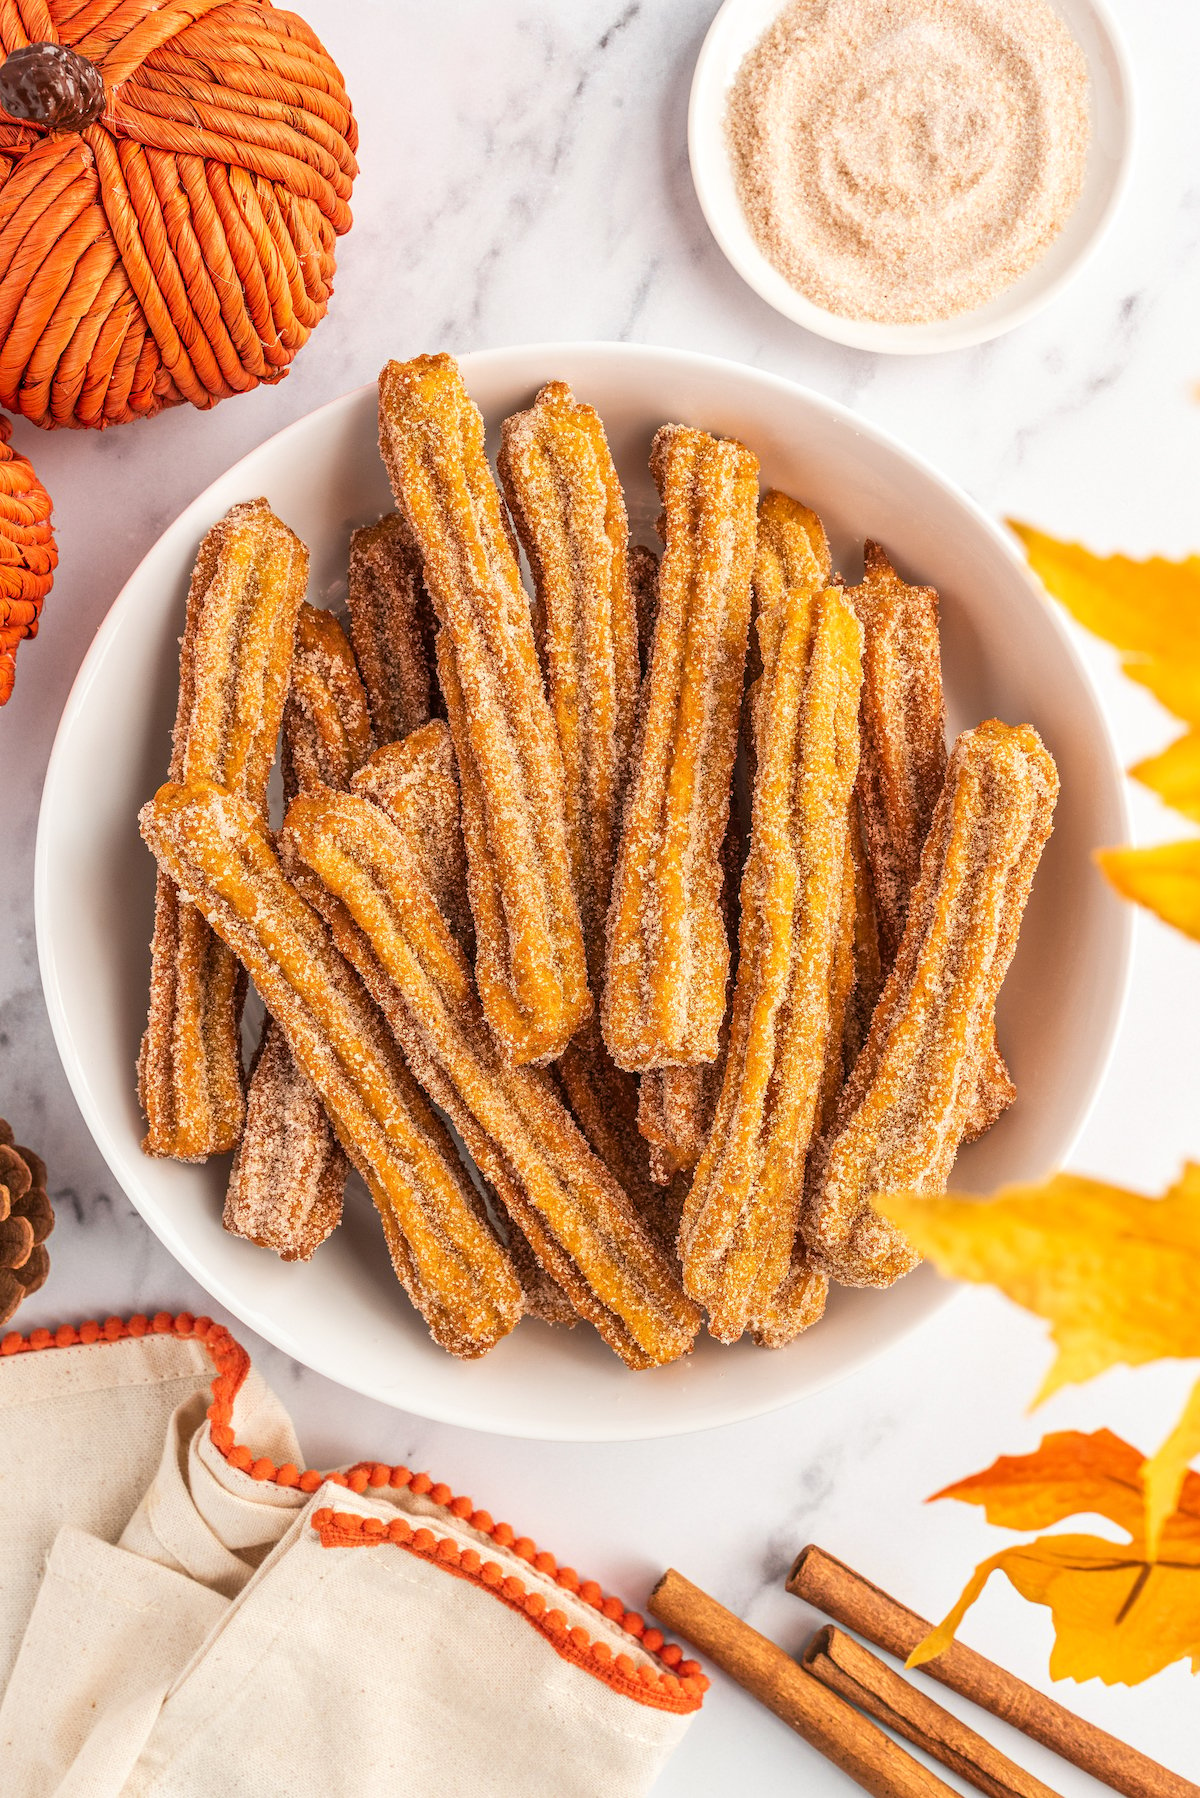 Pumpkin churros with cinnamon sugar in a bowl on the side.